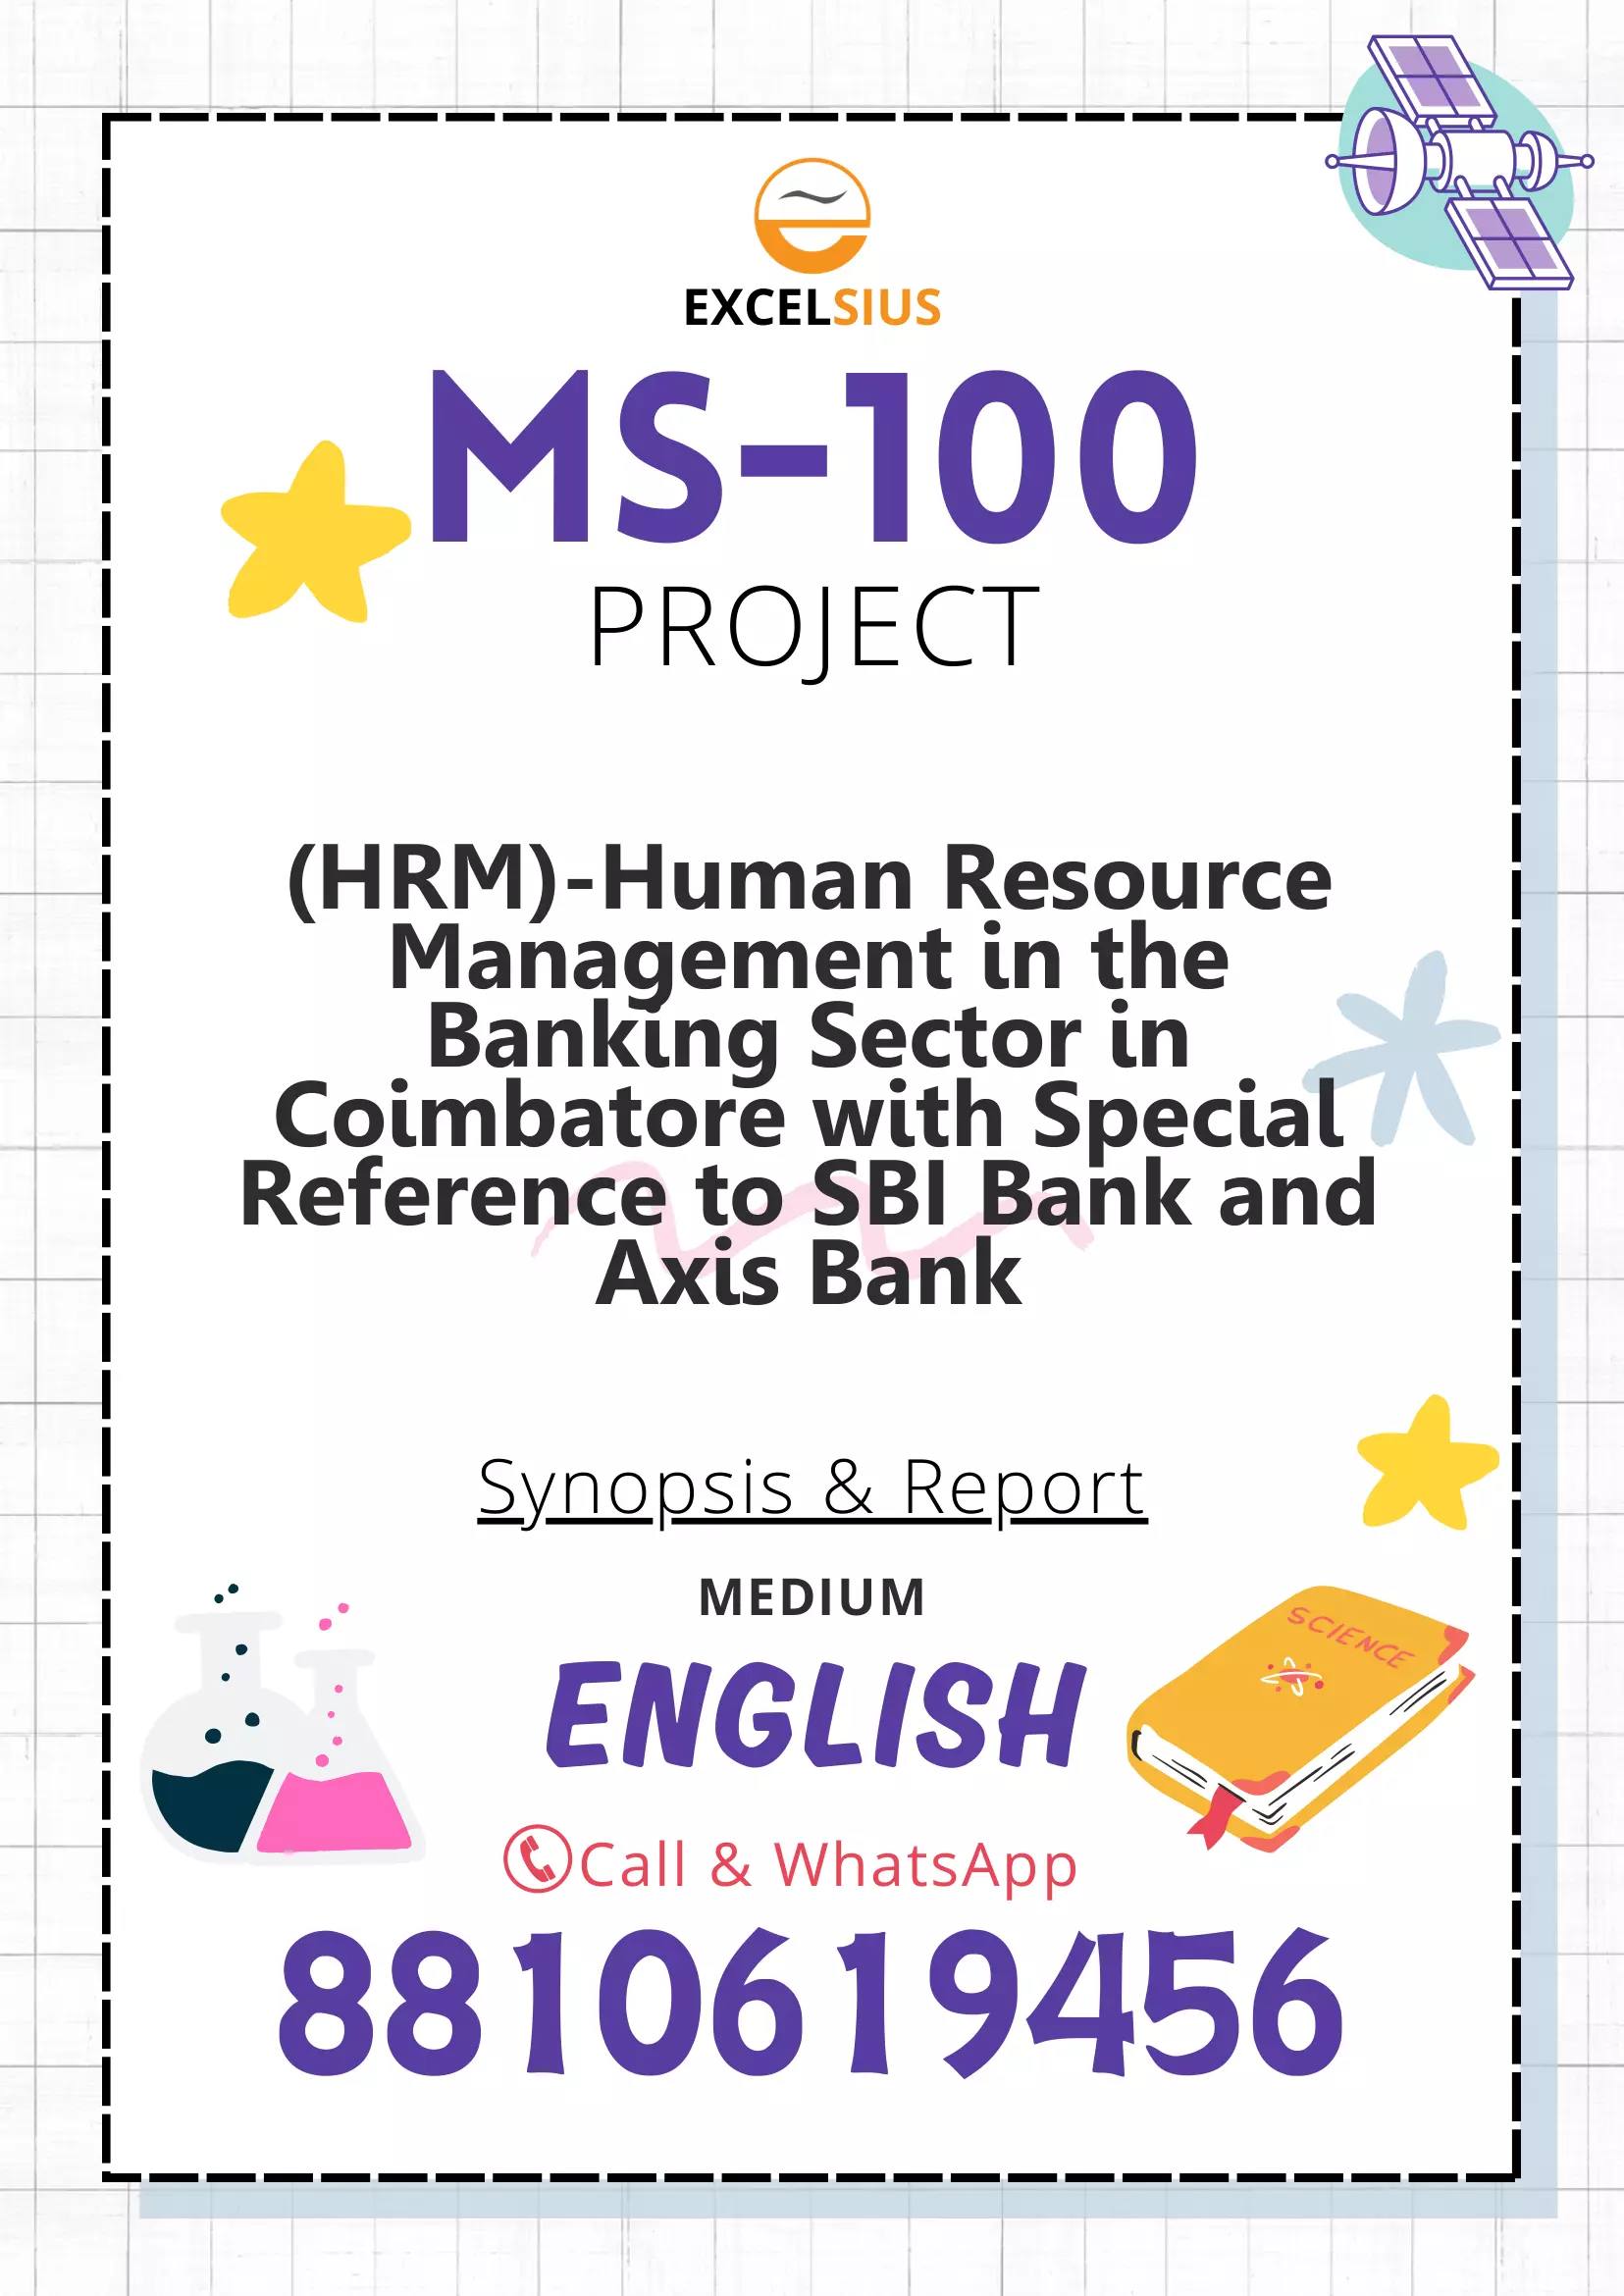 IGNOU MS-100 (Project) (SBI Bank and Axis Bank) - Human Resource Management in the Banking Sector in Coimbatore with Special Reference to SBI Bank and Axis Bank-